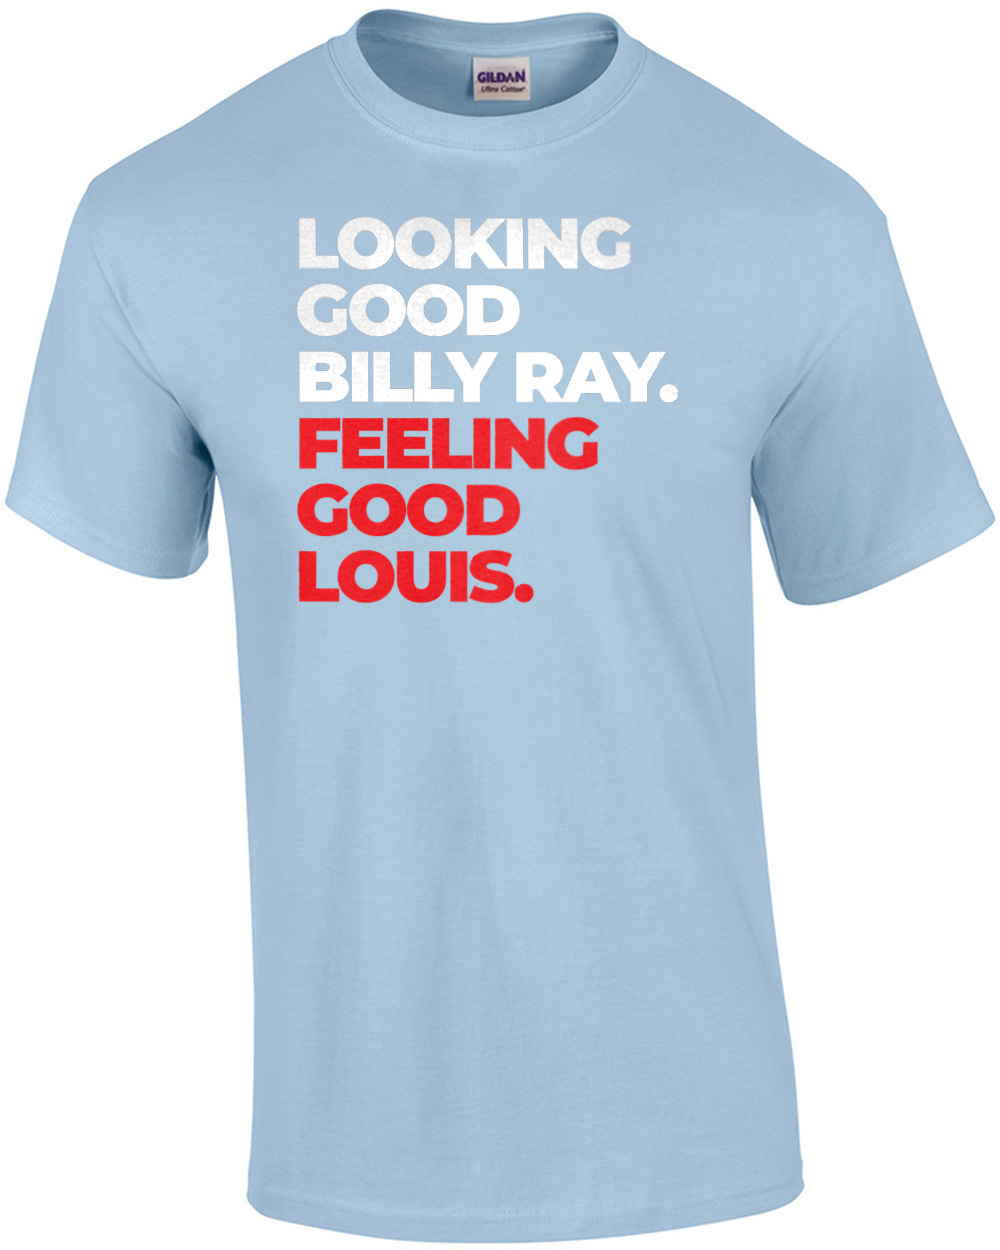 Looking Good Billy Ray. Feeling Good Louis. Trading Places 80's T-shirt